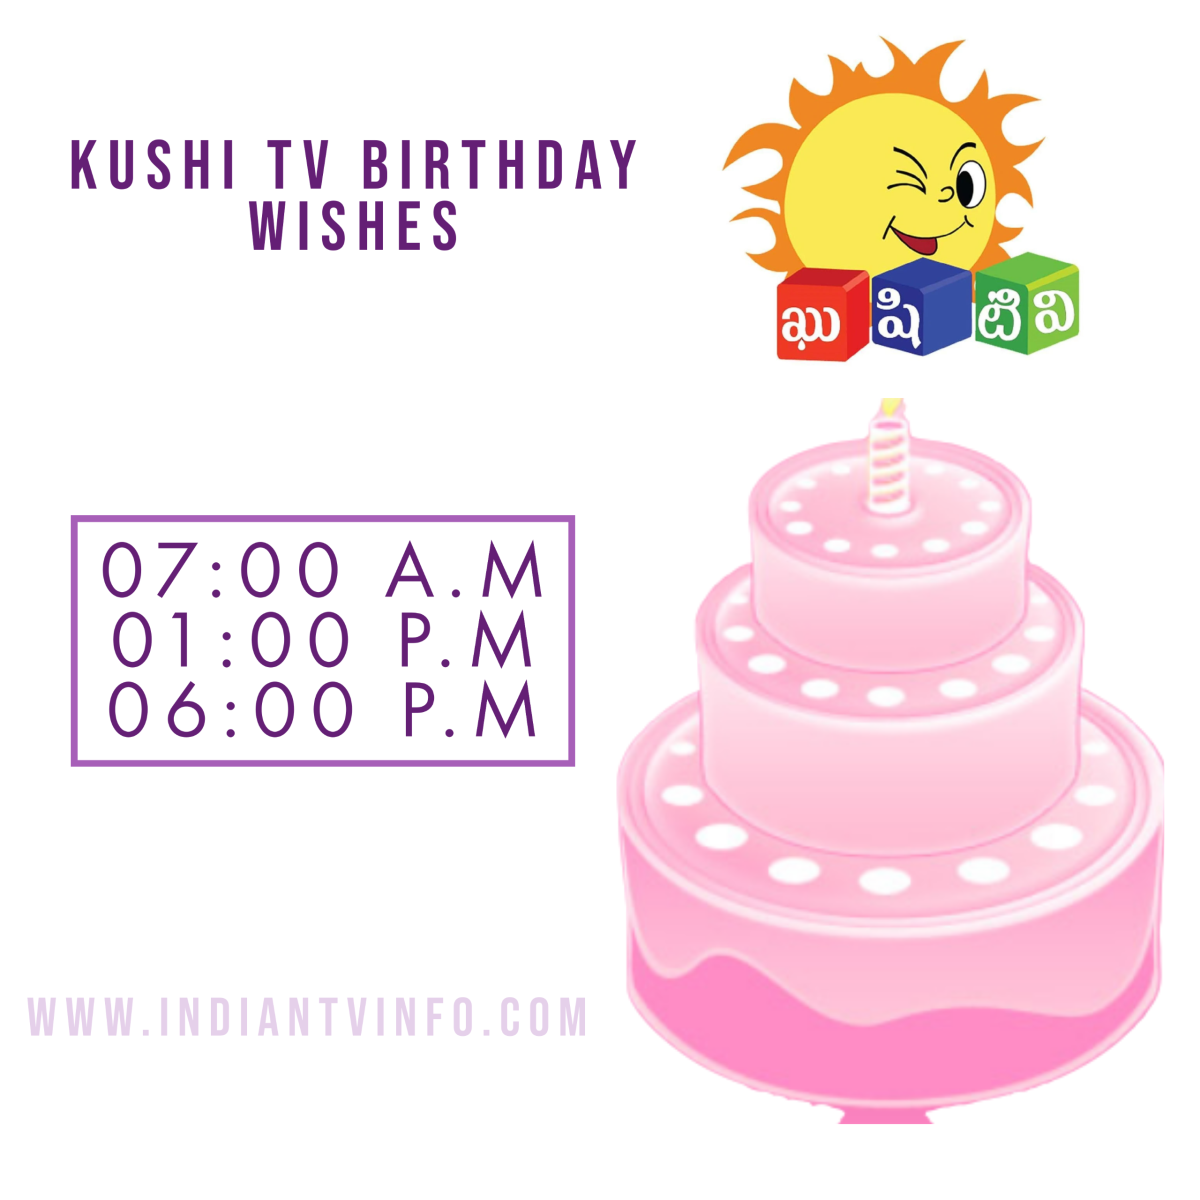 Kushi TV Channel Programs Online, TRP Reports - Indian TV News